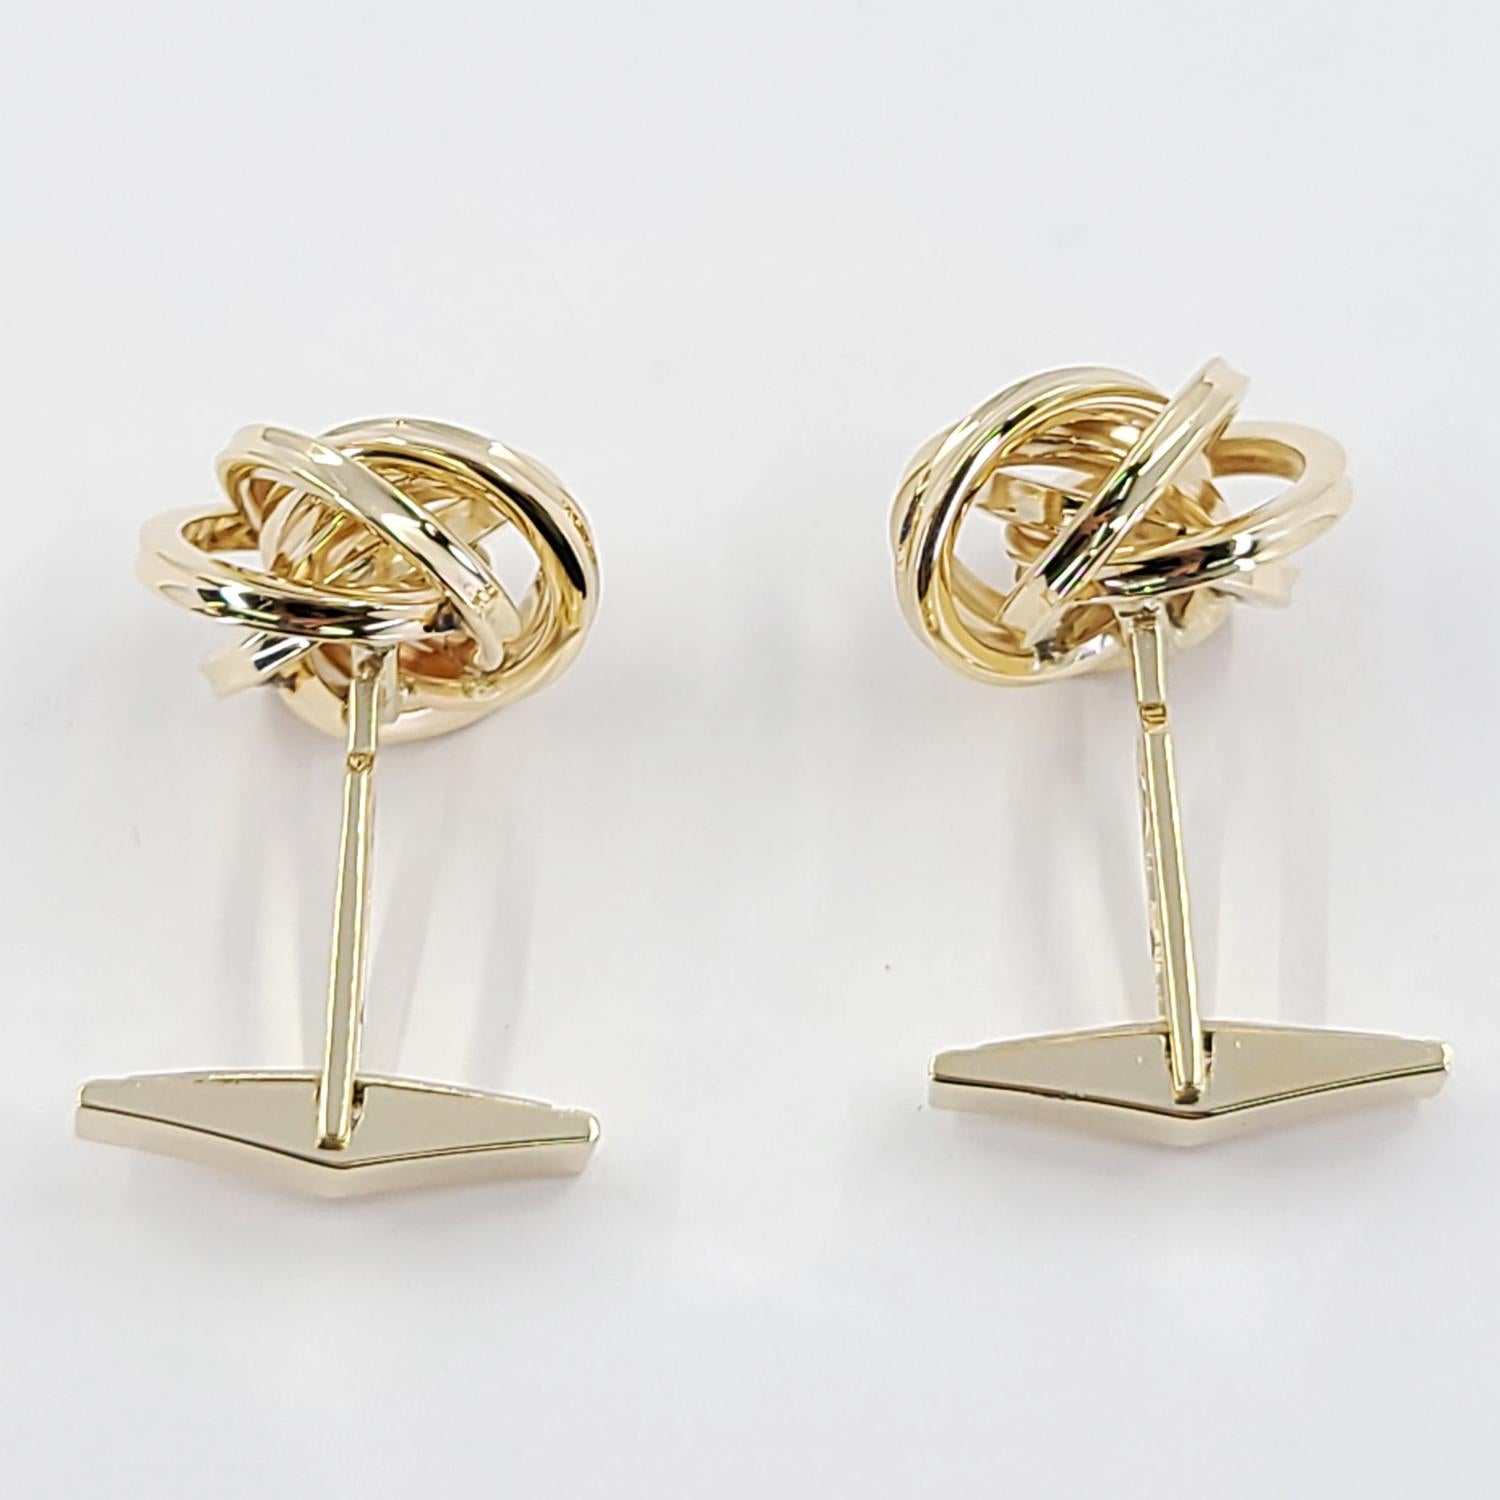 Yellow Gold Knot Cufflinks Set In Good Condition For Sale In Coral Gables, FL